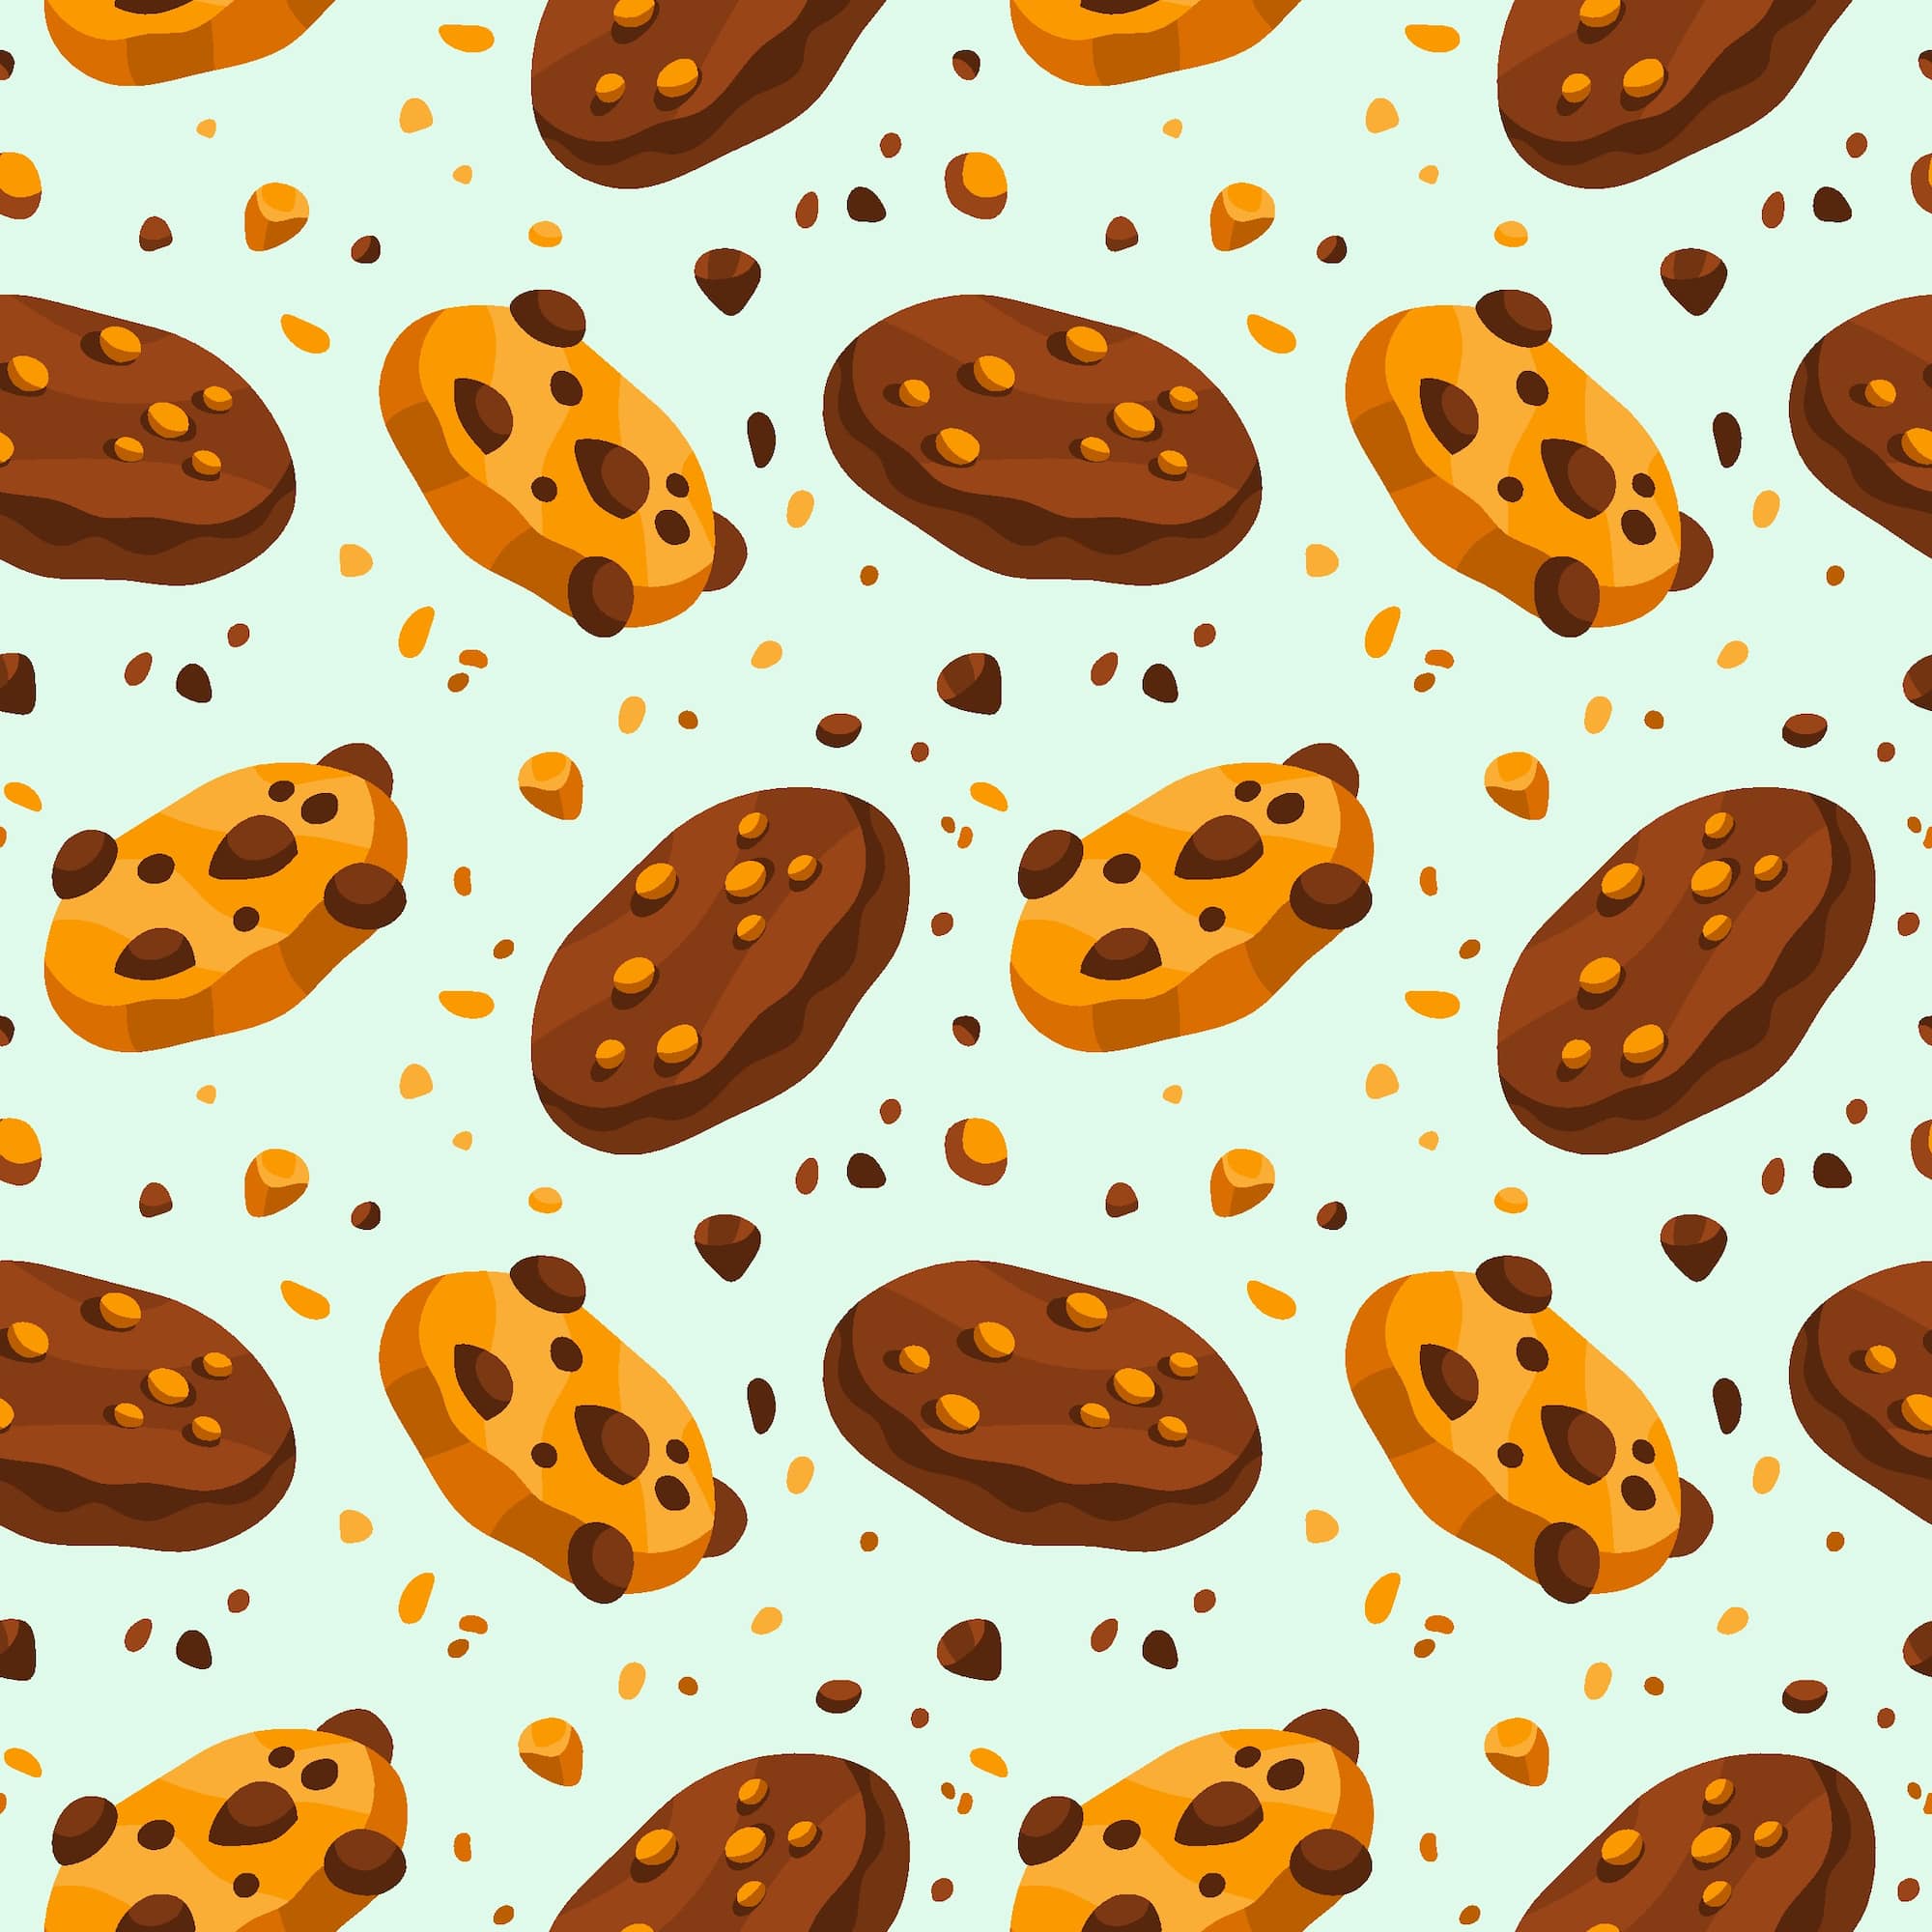 Why is it important for you to conduct a cookie review?